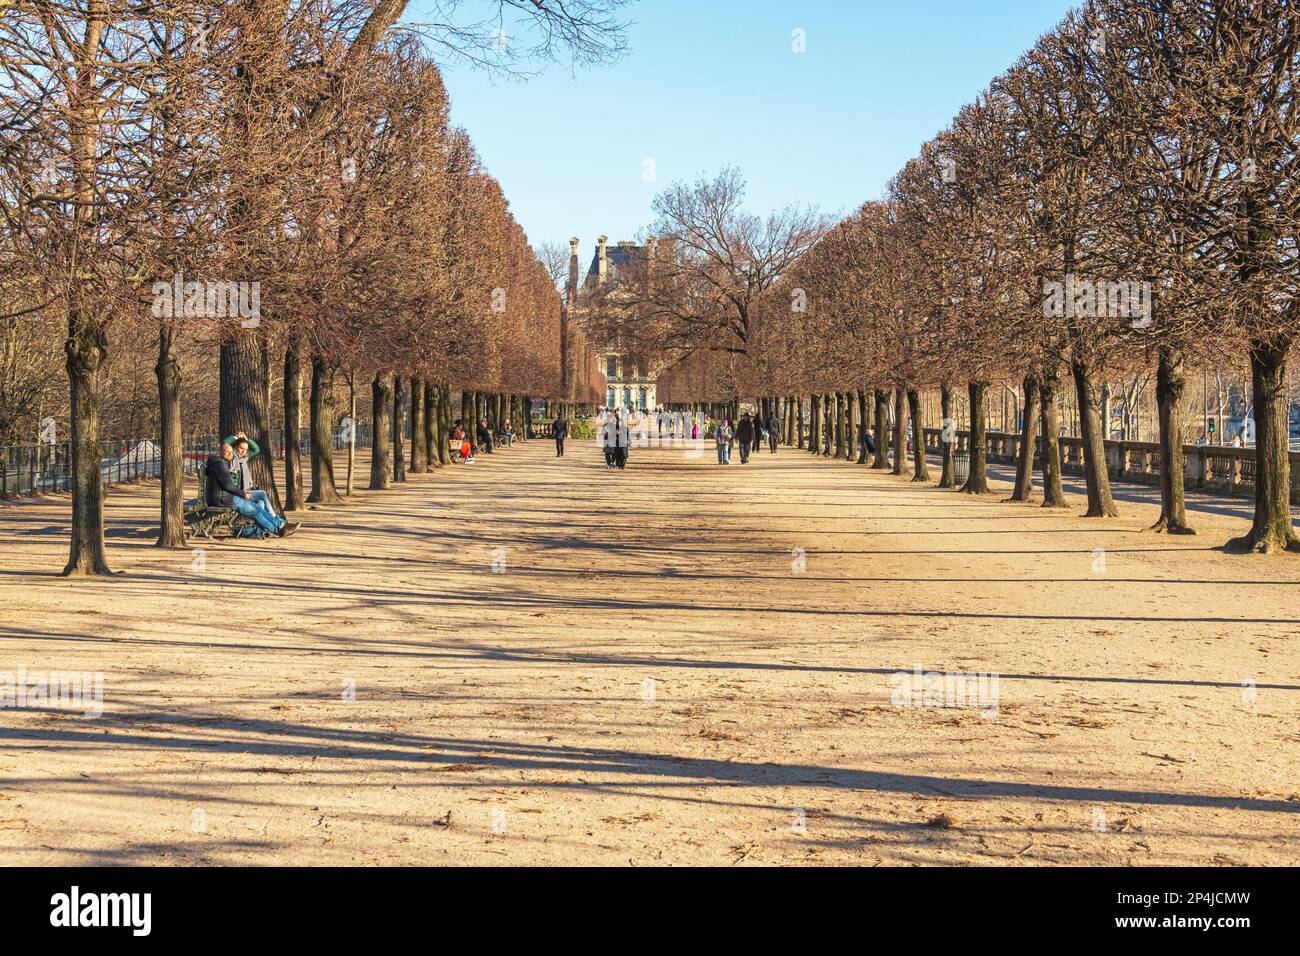 An Avenue of trees in the Jardin des Tuileries, Paris France. Stock Photo